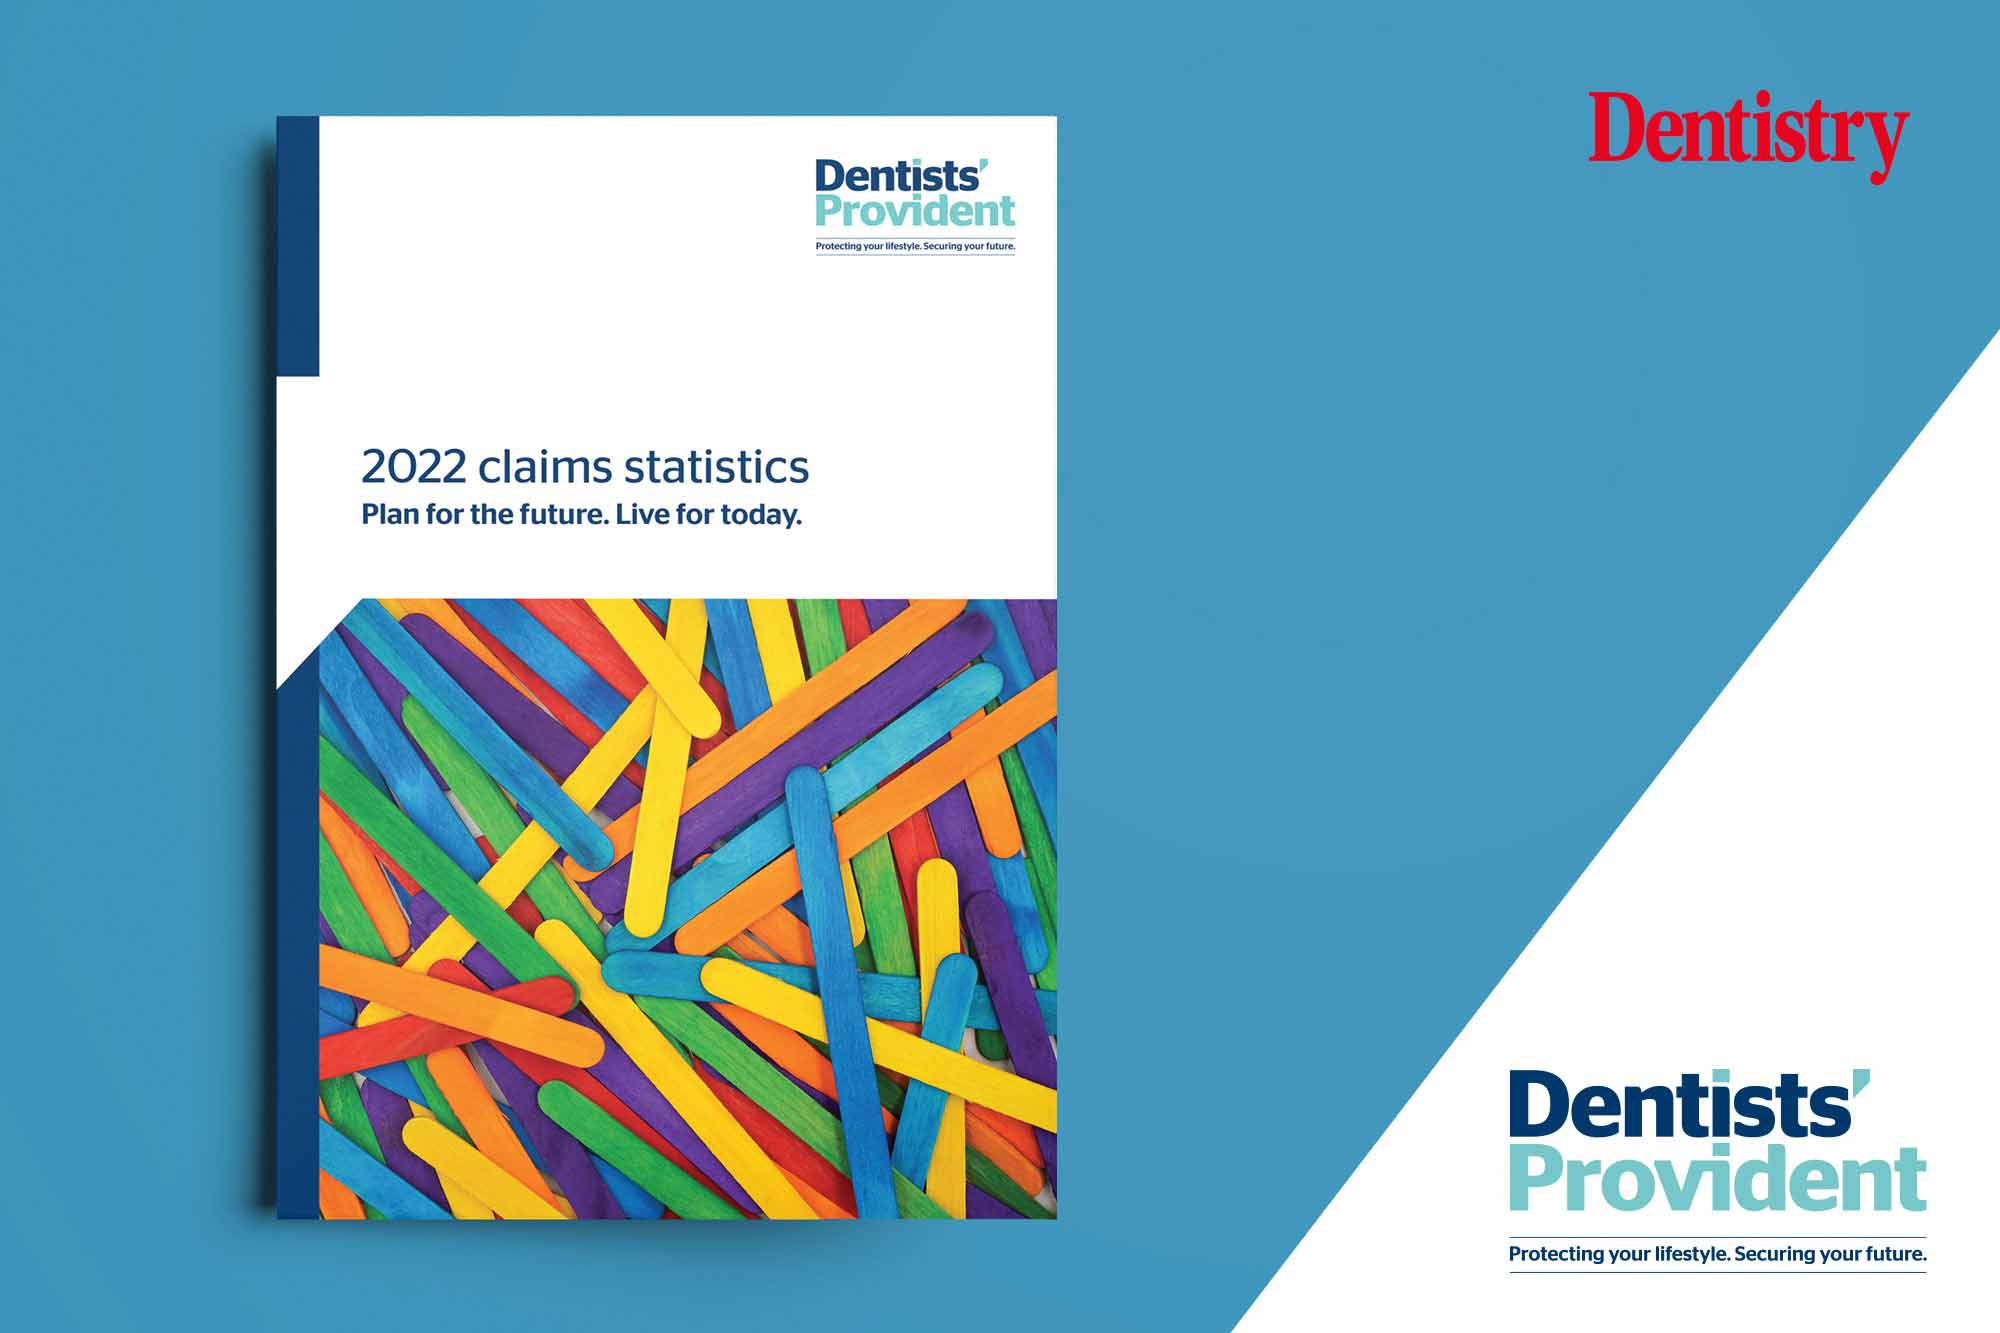 Dentists’ Provident paid 99.1% of new claims in 2022